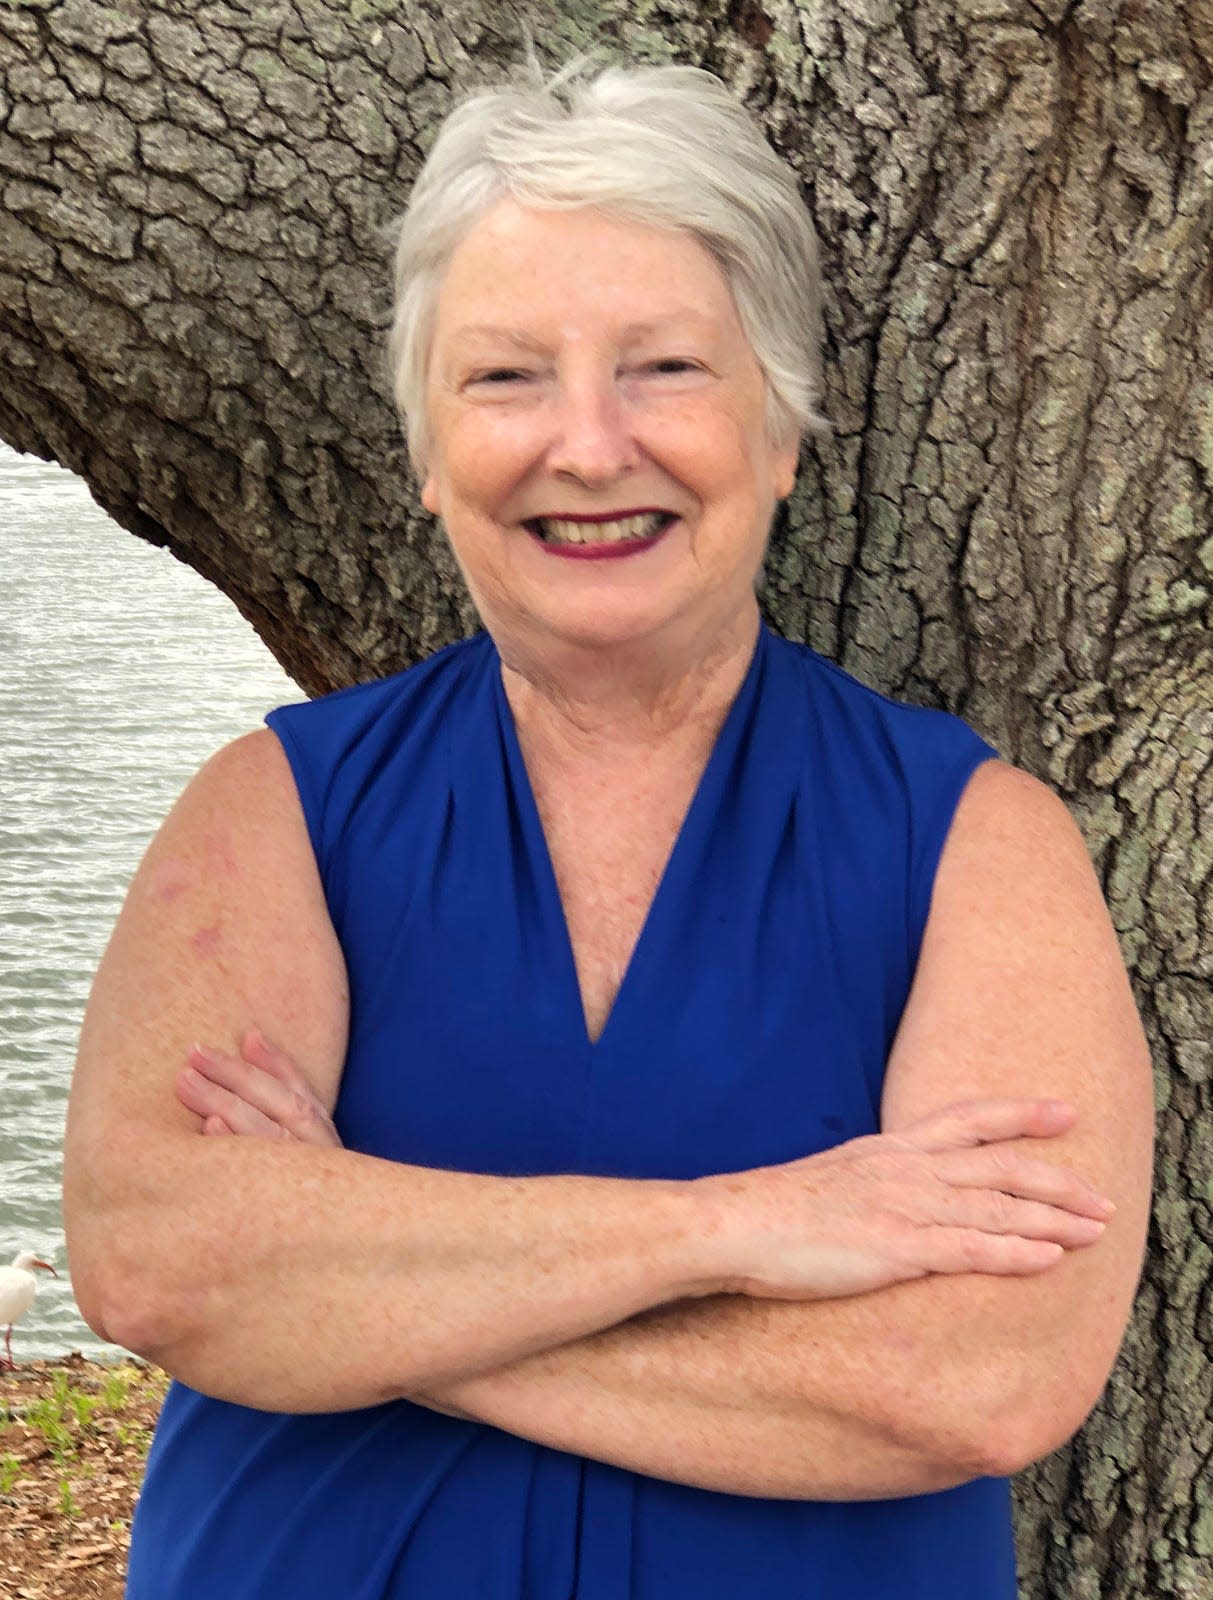 Kay Klymko of Lakeland has filed to run for the Polk County Commission in District 1.